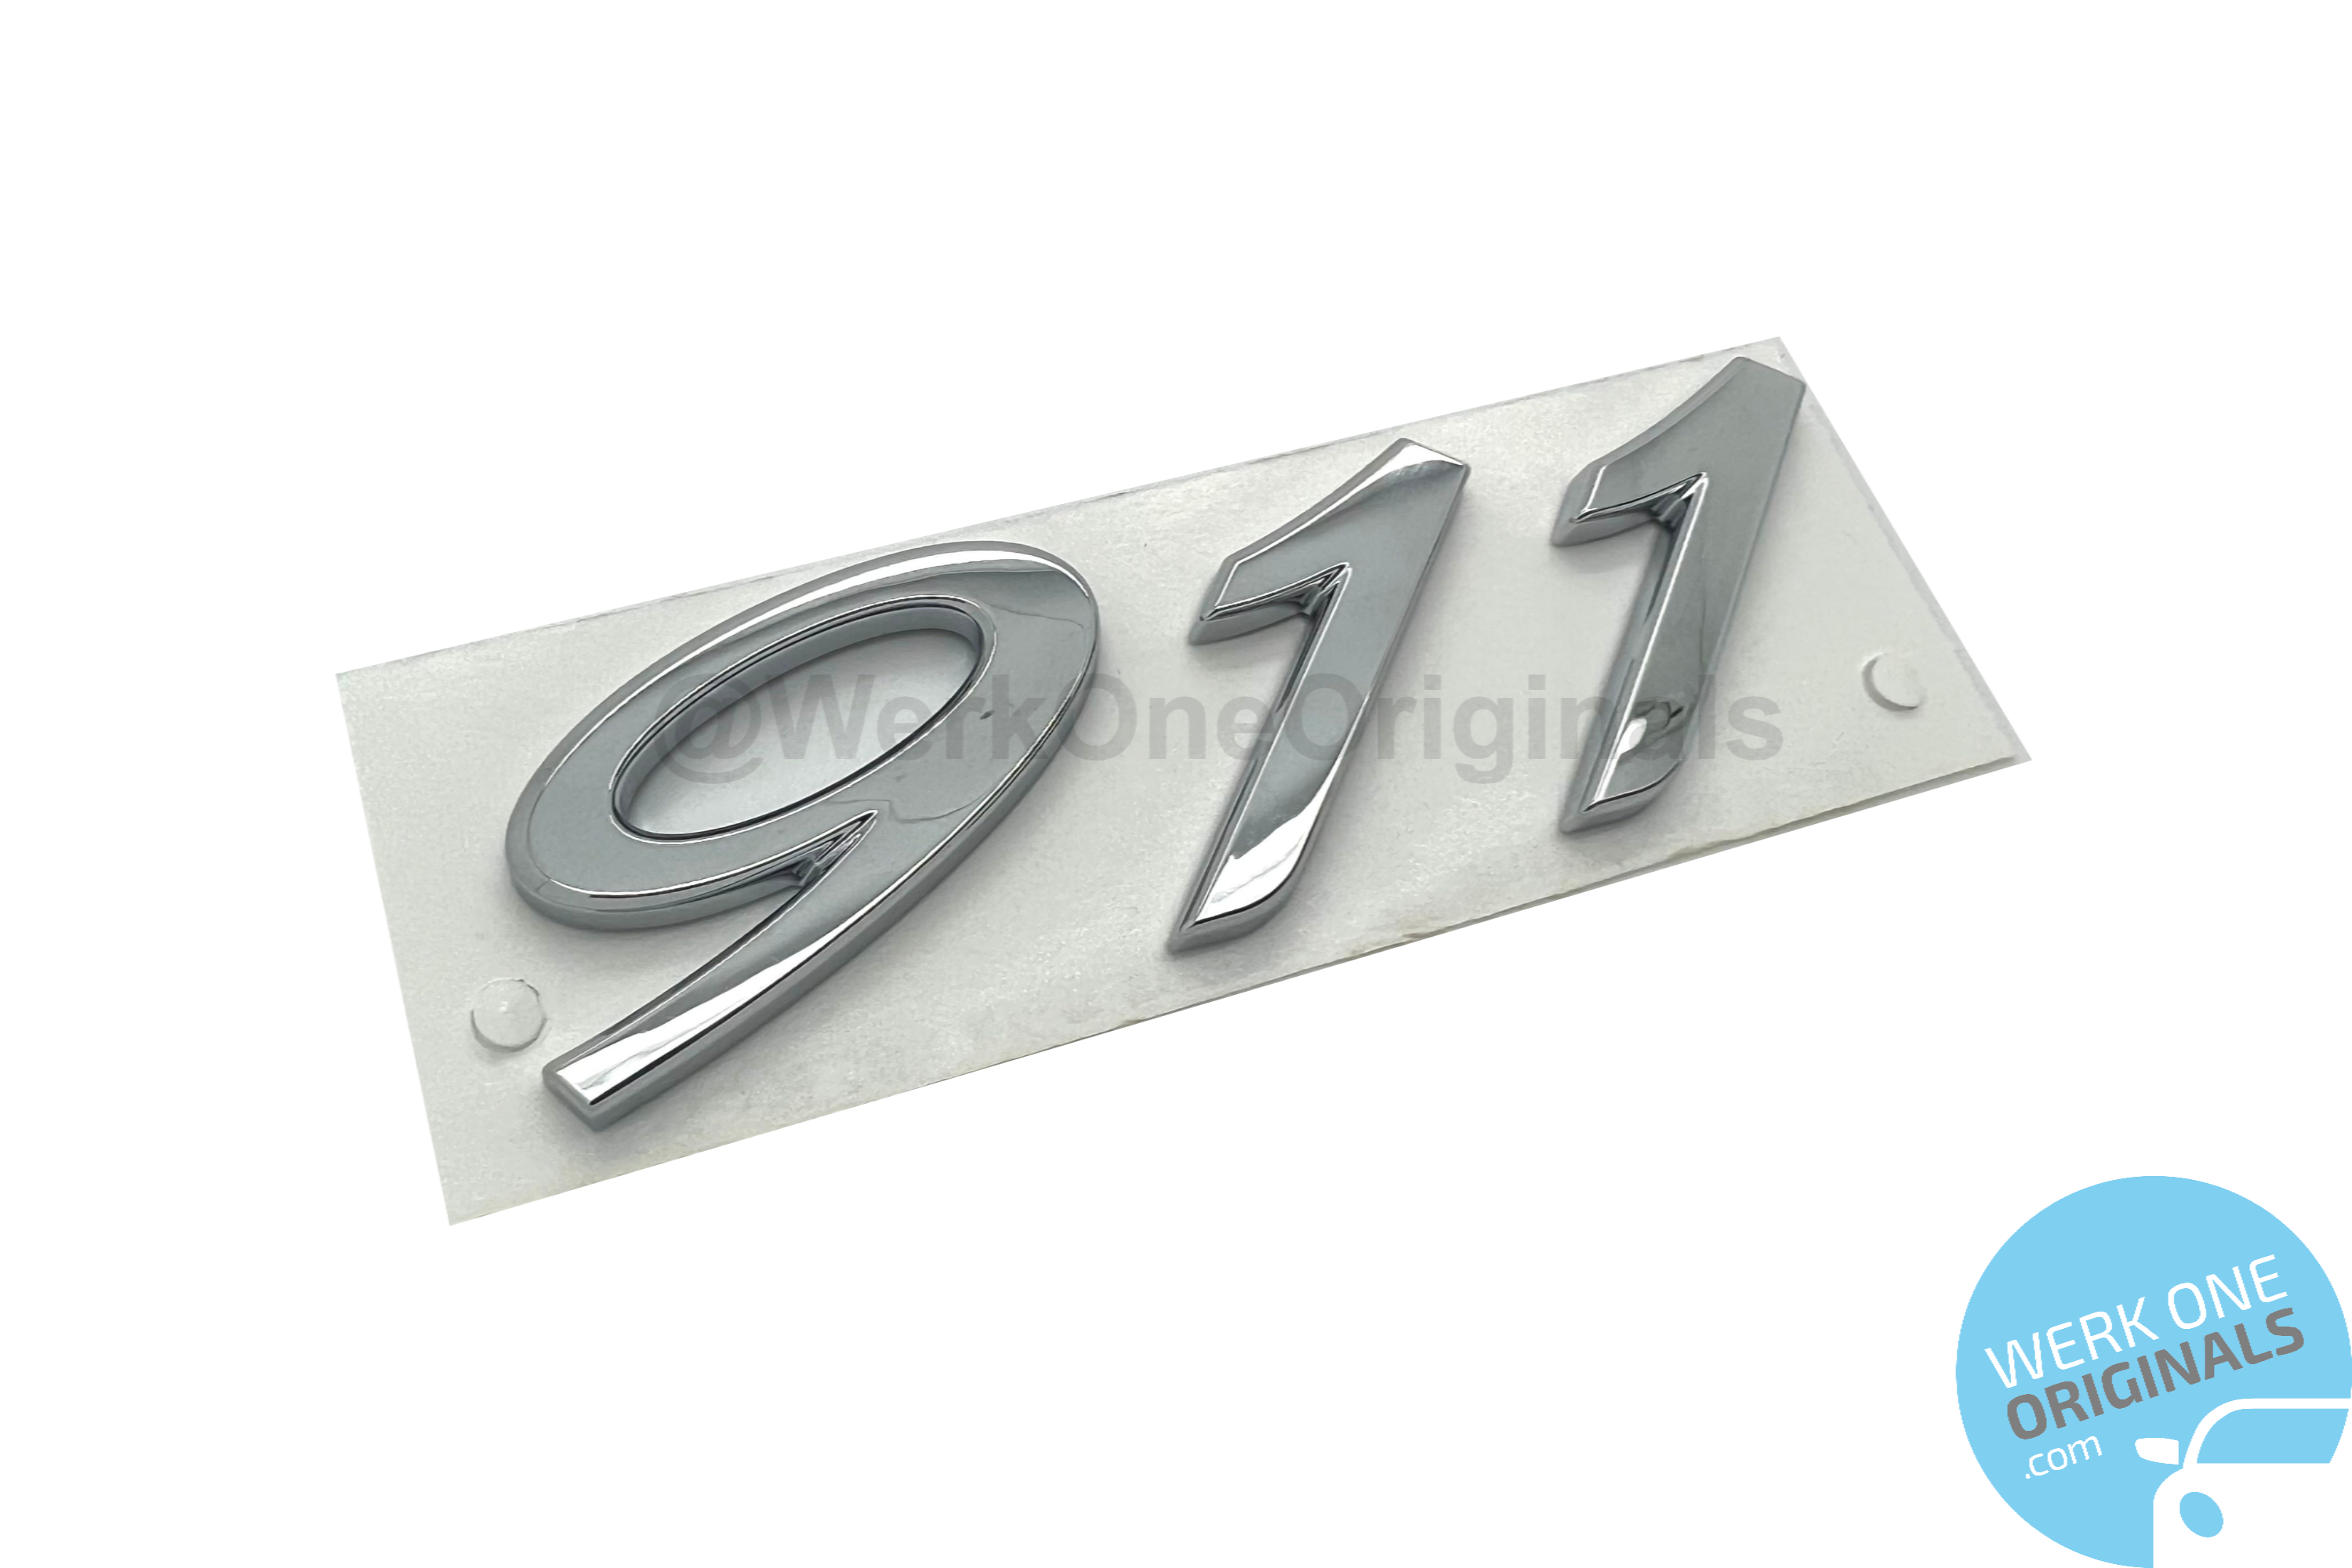 Porsche Official '911' Rear Badge Decal in Chrome Silver for 911 Type 964 Models